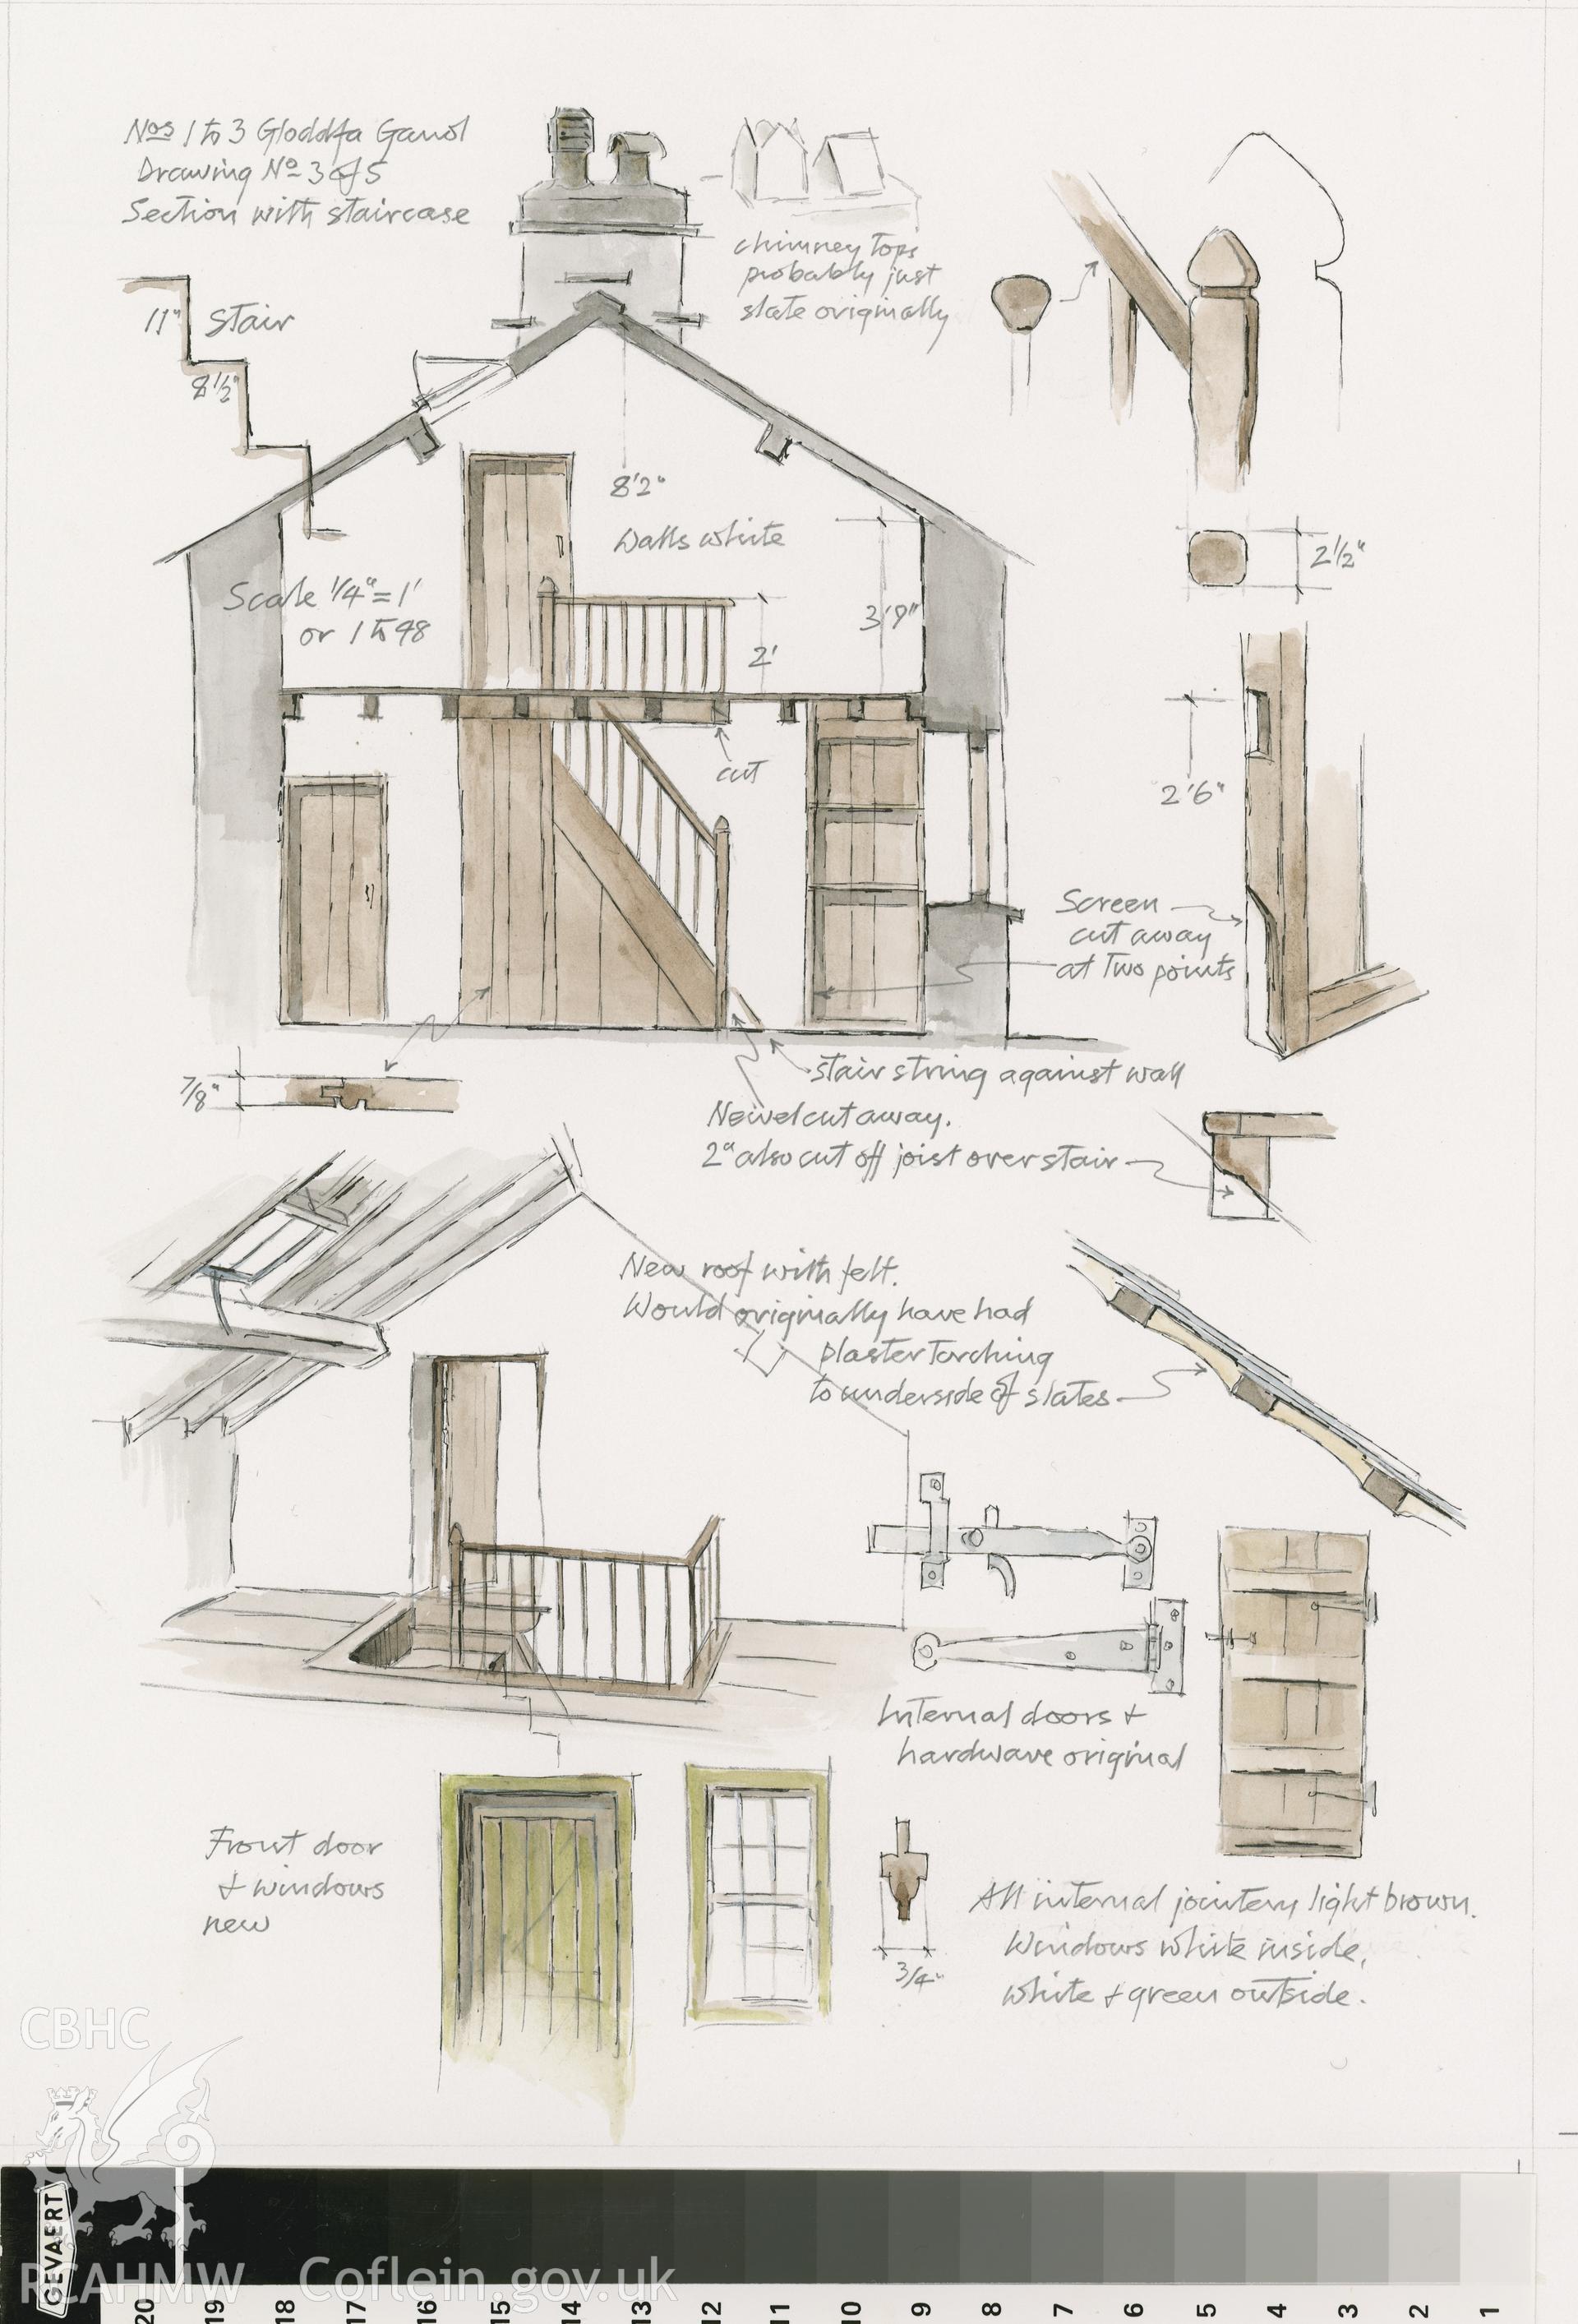 Gloddfa Ganol Cottages - Section looking to Stairs: (pencil, ink and watercolour) drawing.